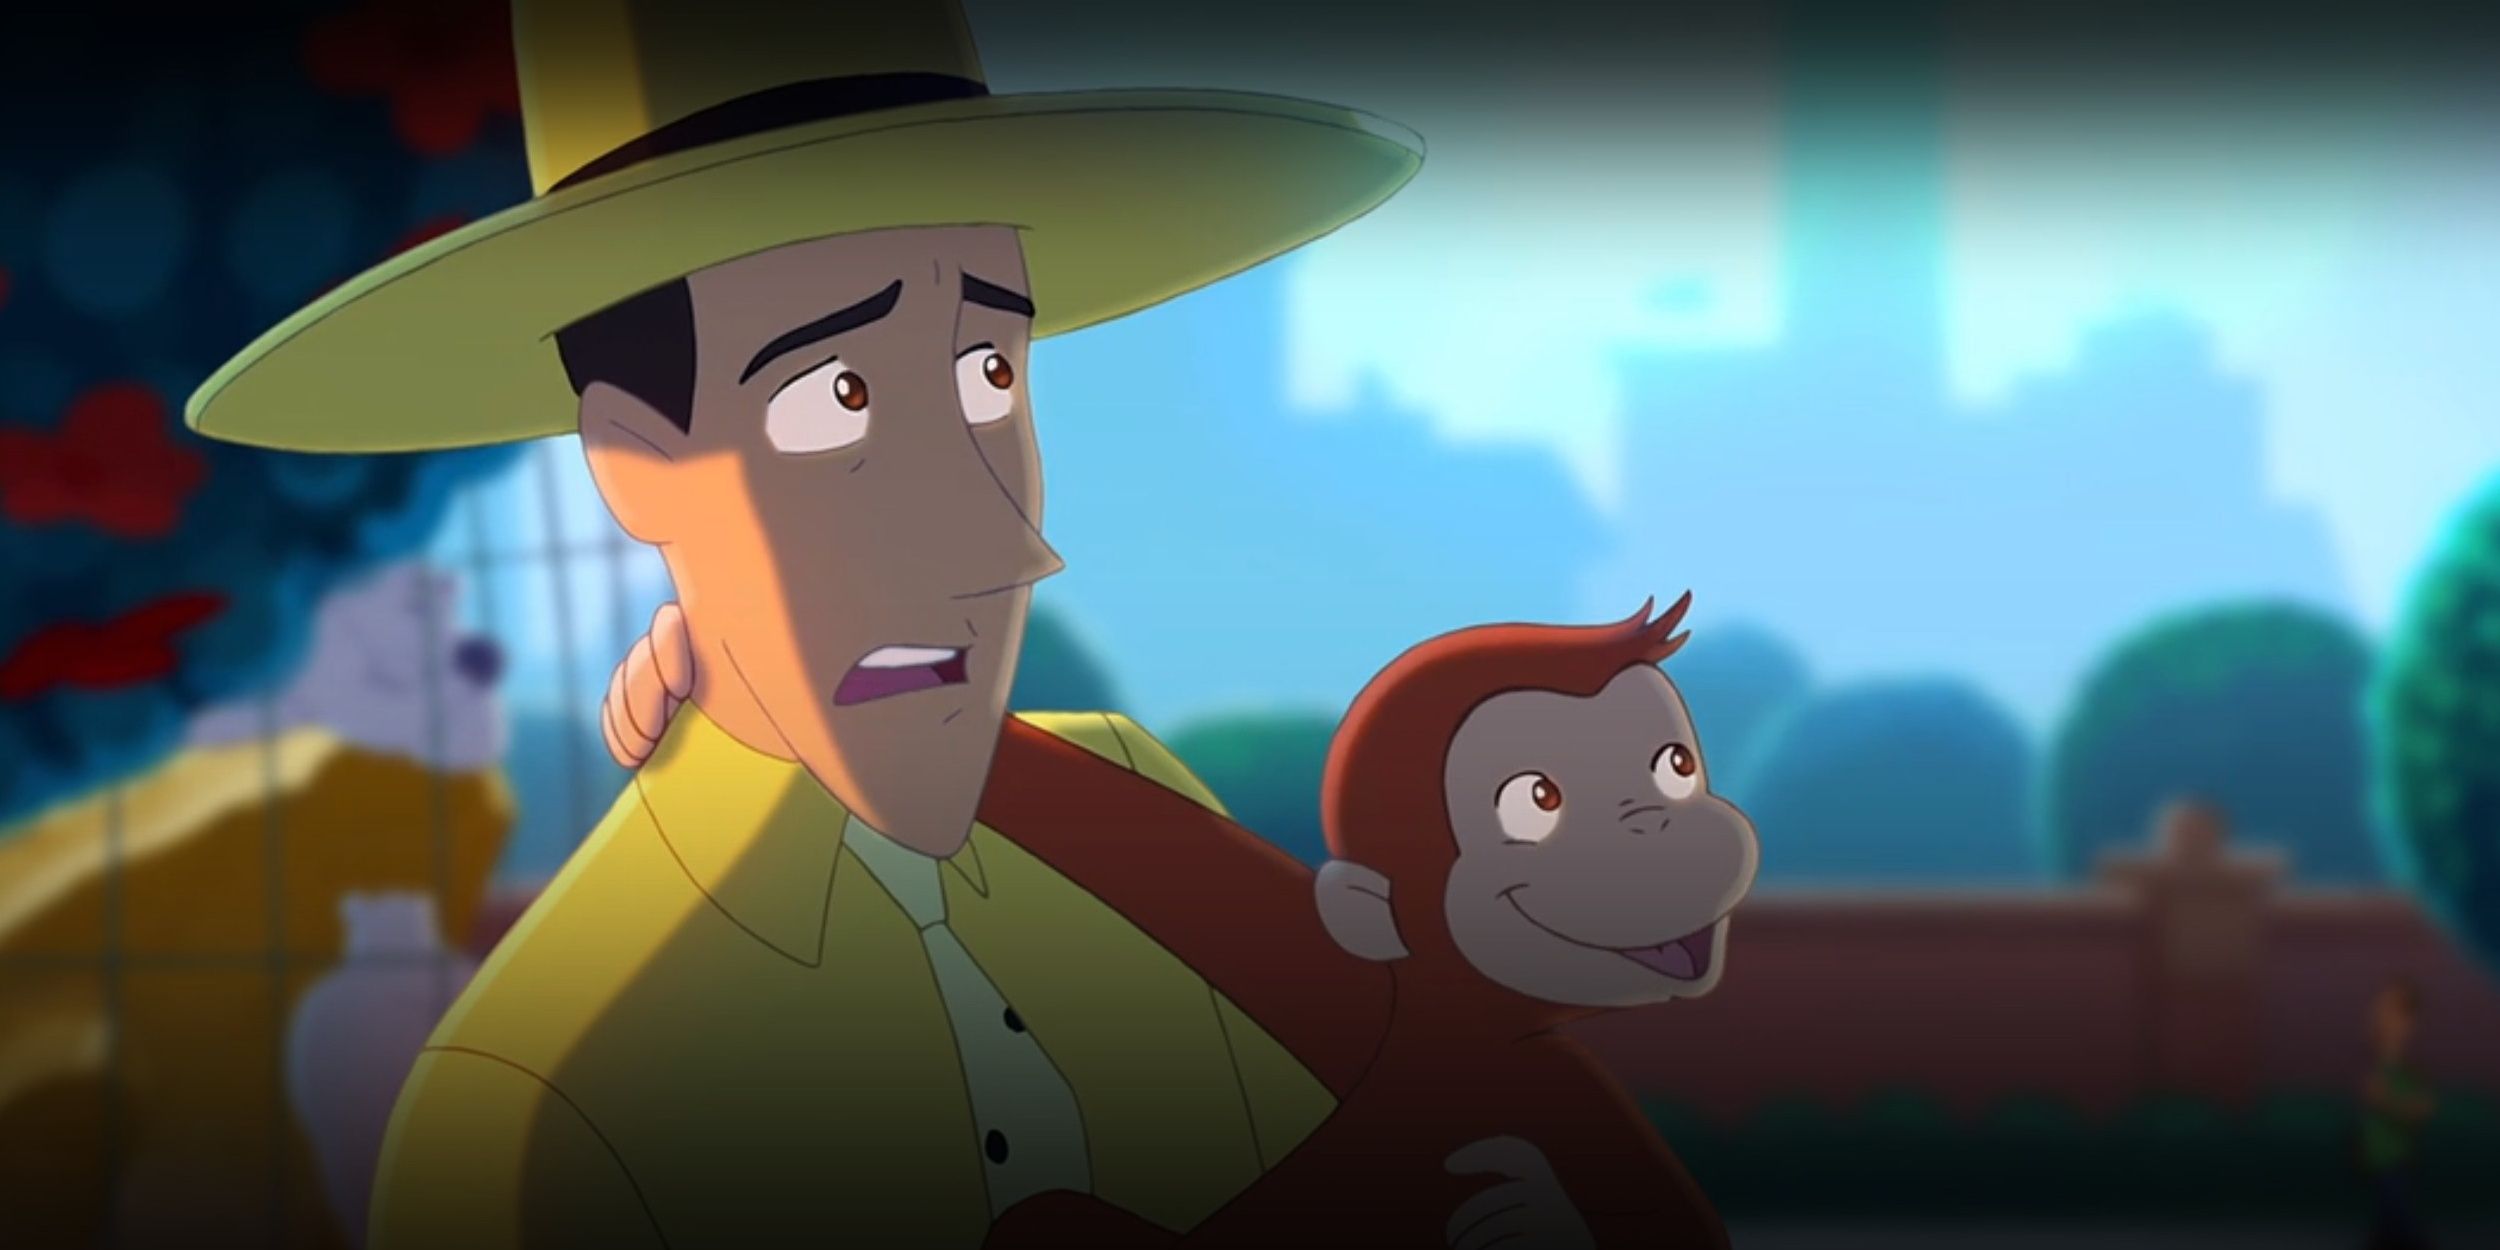 George smiling and hanging on the Man in the Yellow Hat who looks worried in Curious George